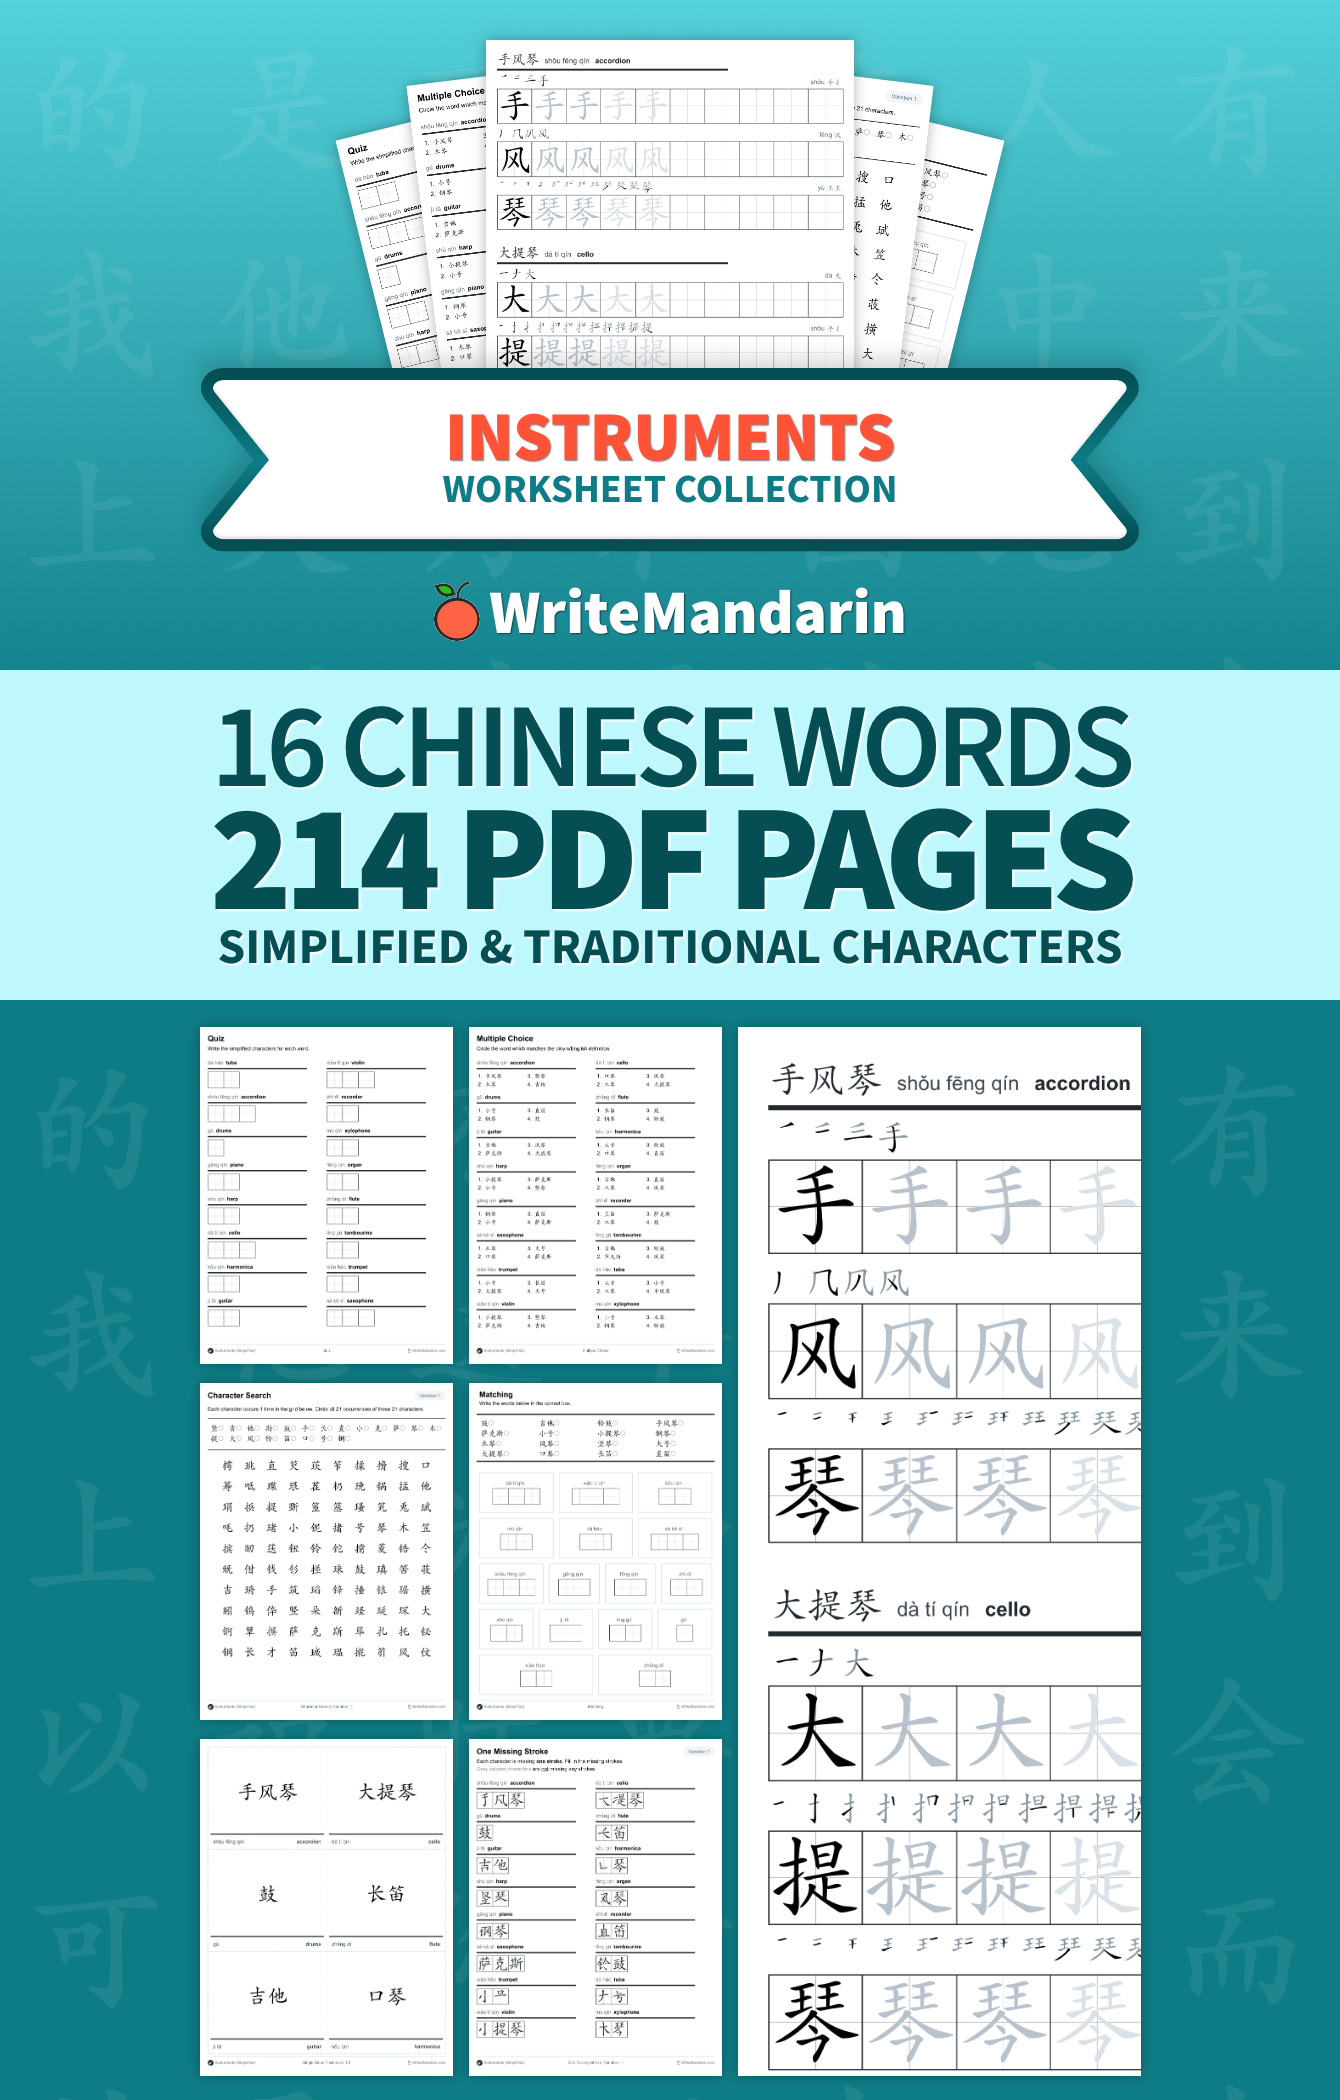 Preview image of Instruments worksheet collection